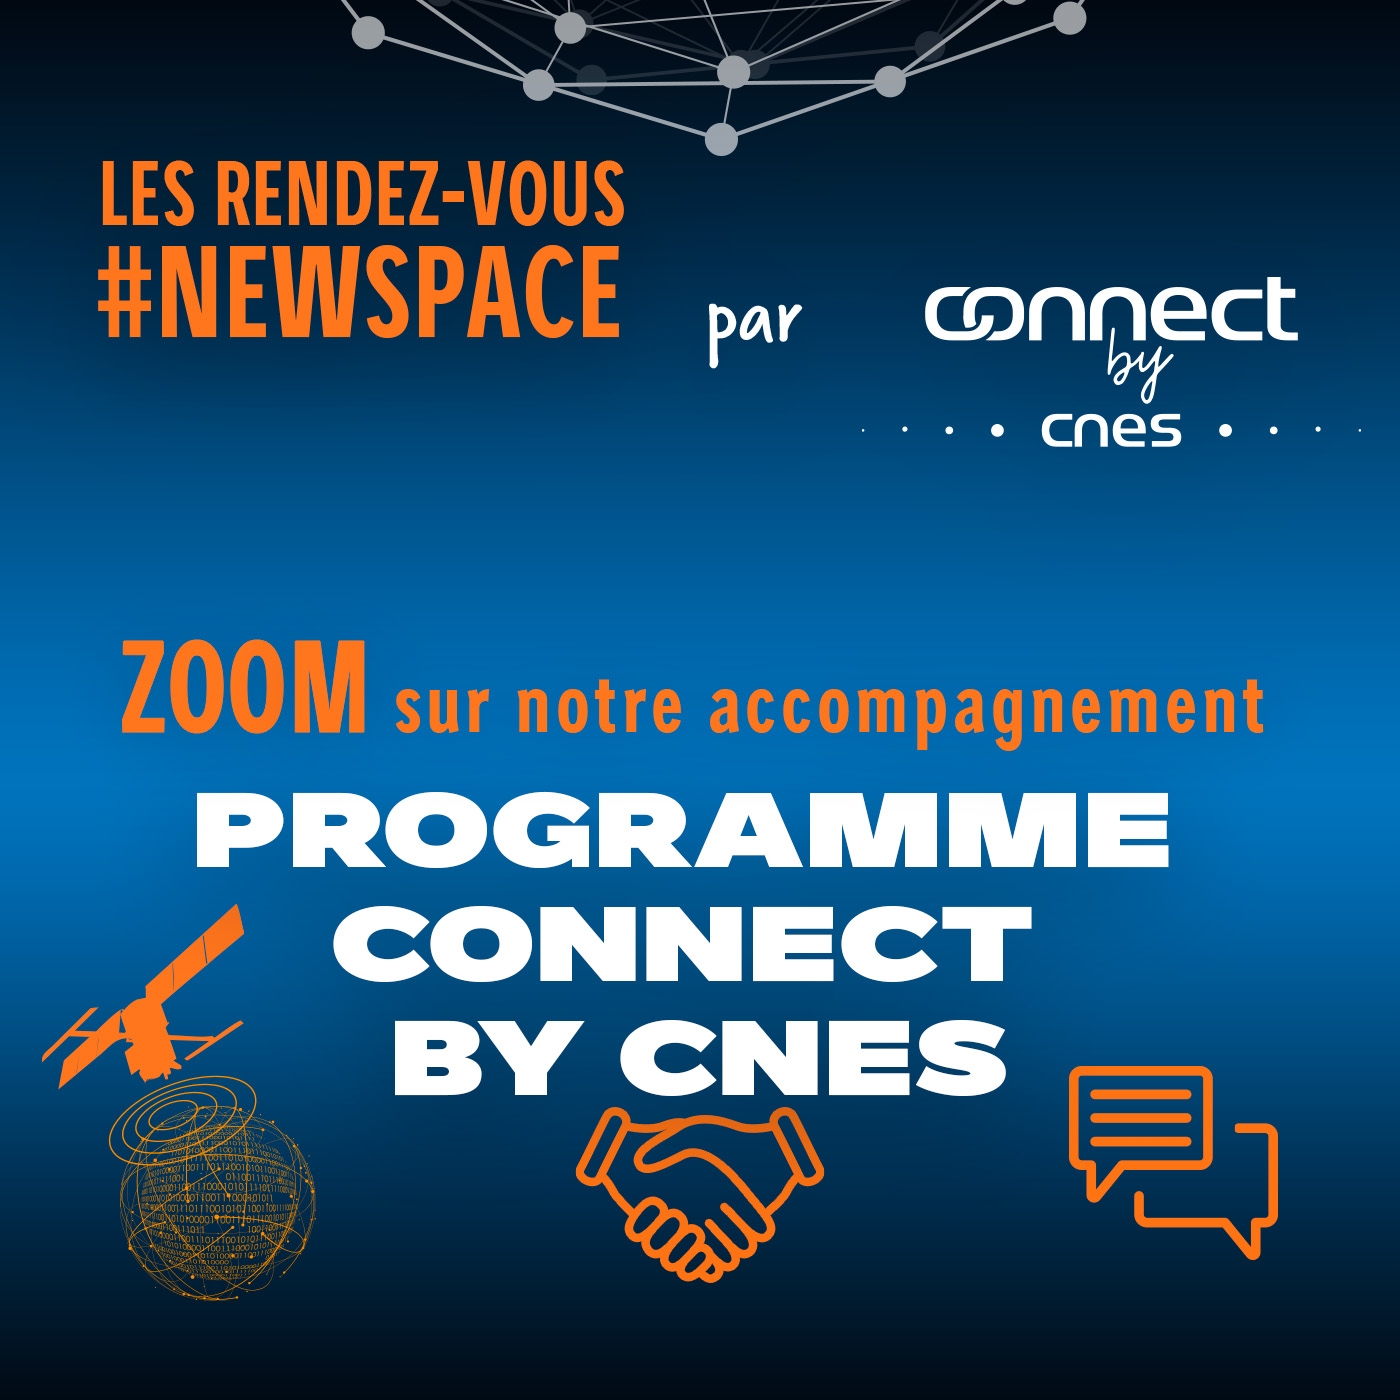 is_vignette-podcast-connect-by-cnes_episode1-programme.jpg